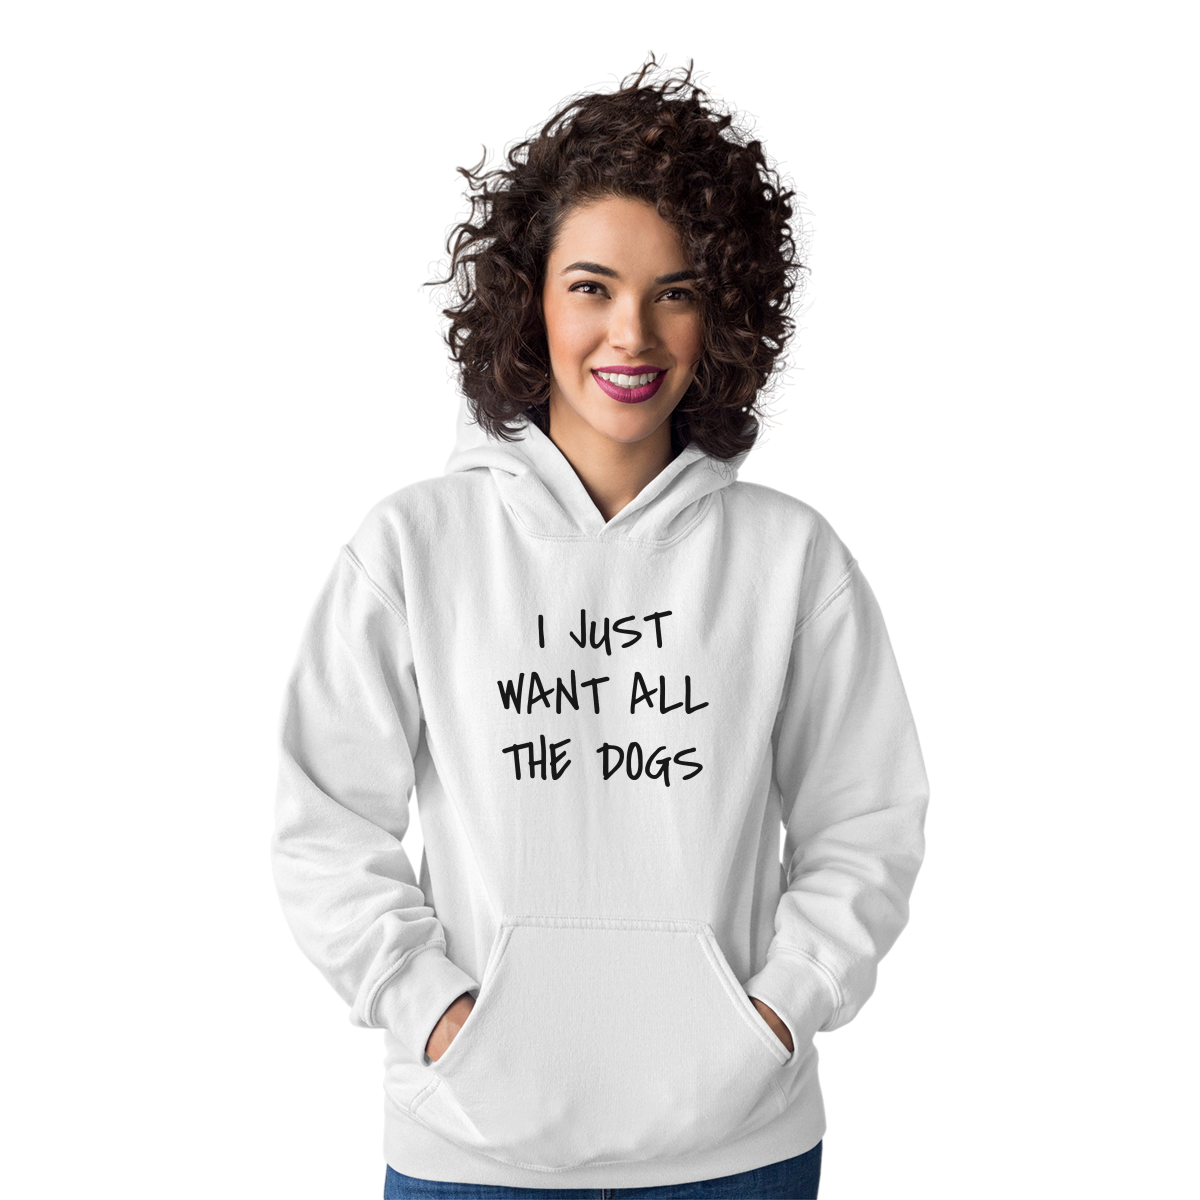 I Just Want All the Dogs Unisex Hoodie | White